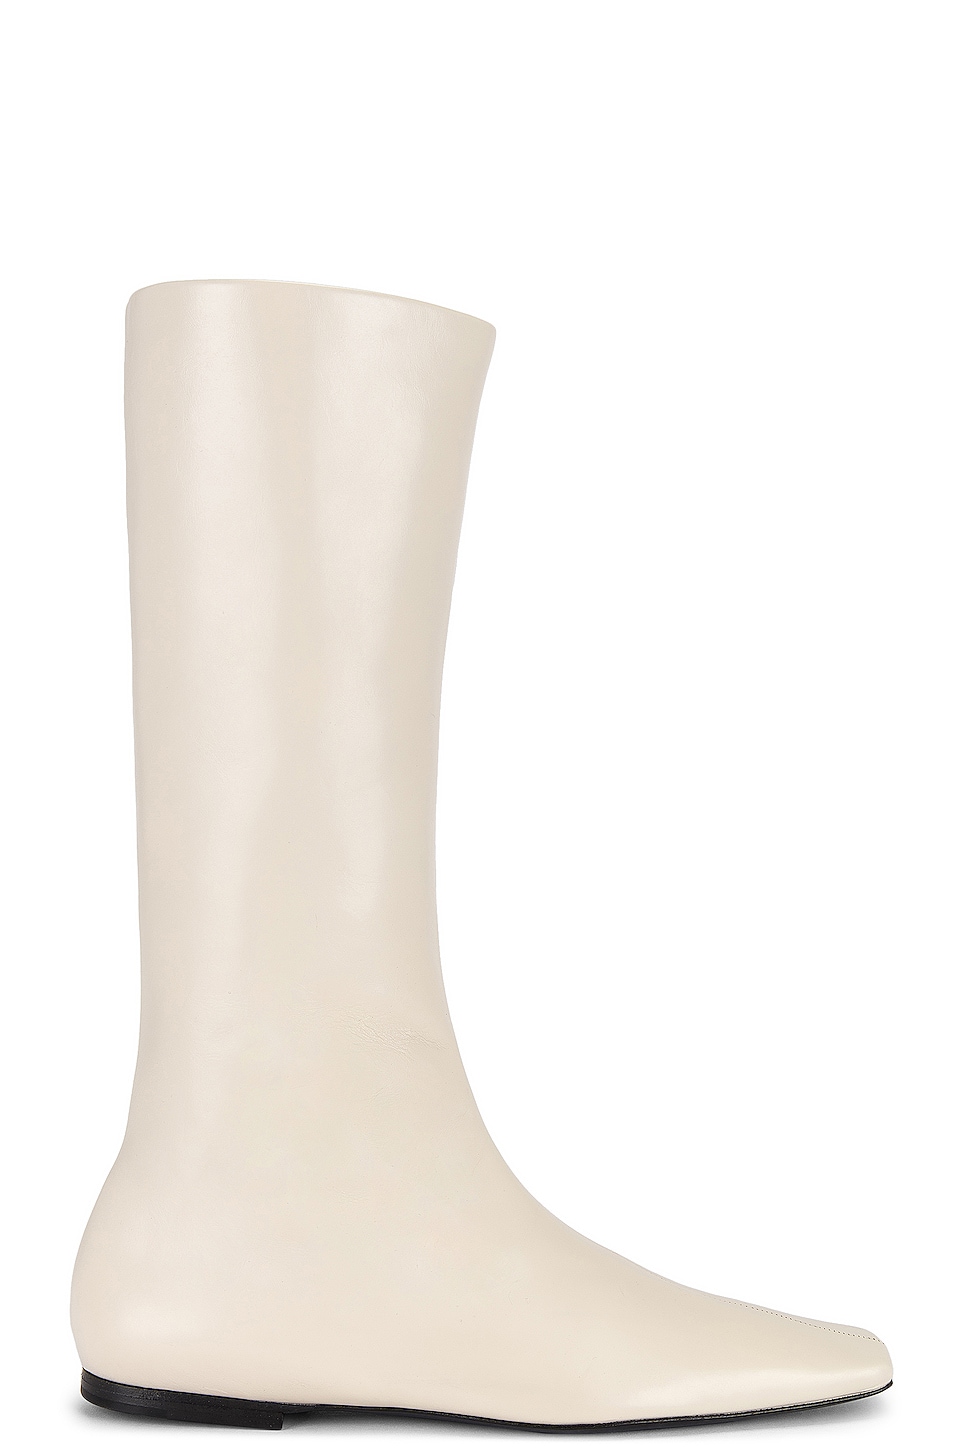 Image 1 of The Row Bette Boot in Ivory